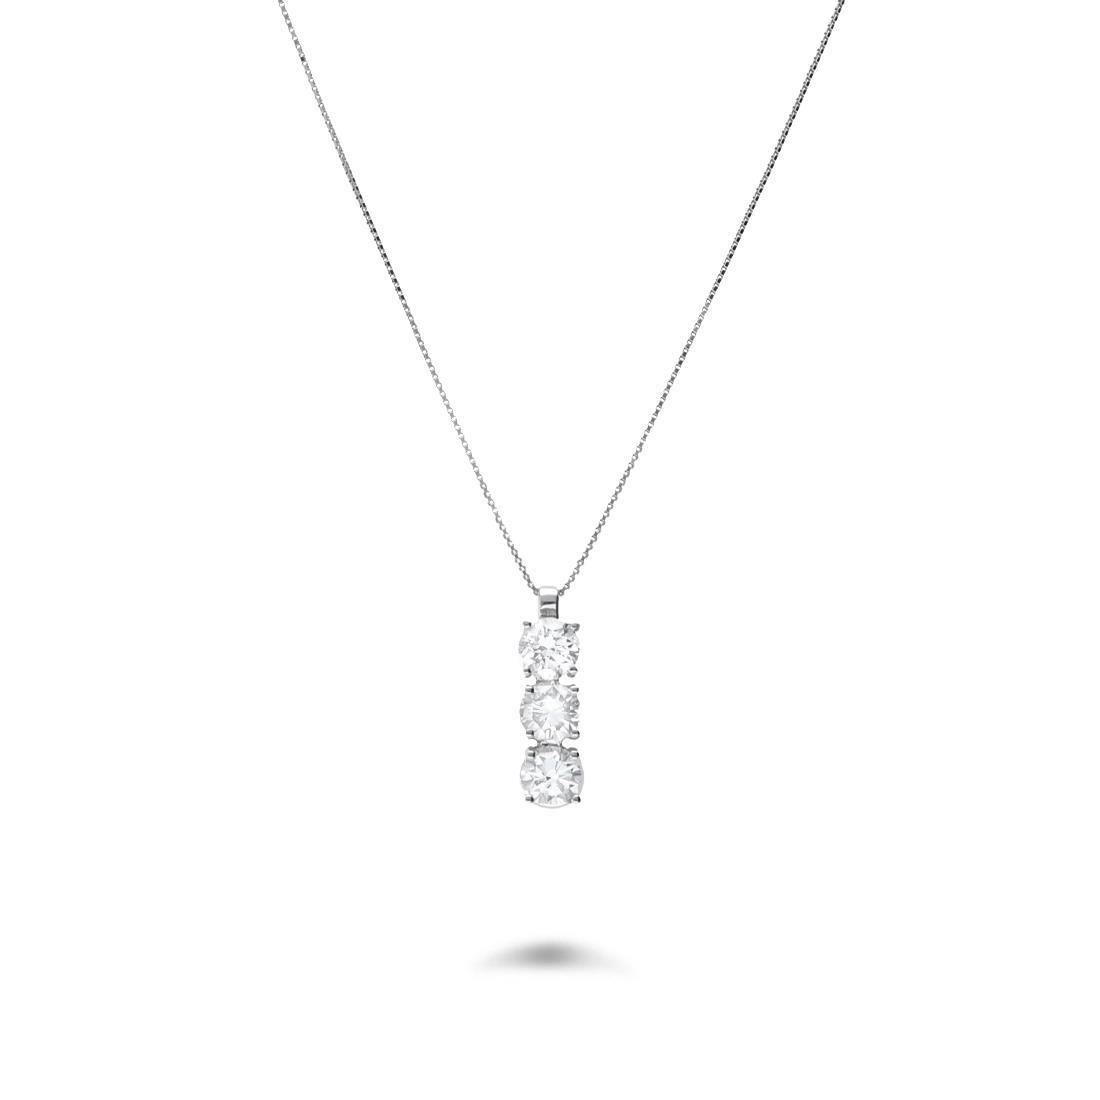 Trilogy necklace in gold and diamonds ct. 0.66 - ALFIERI & ST. JOHN